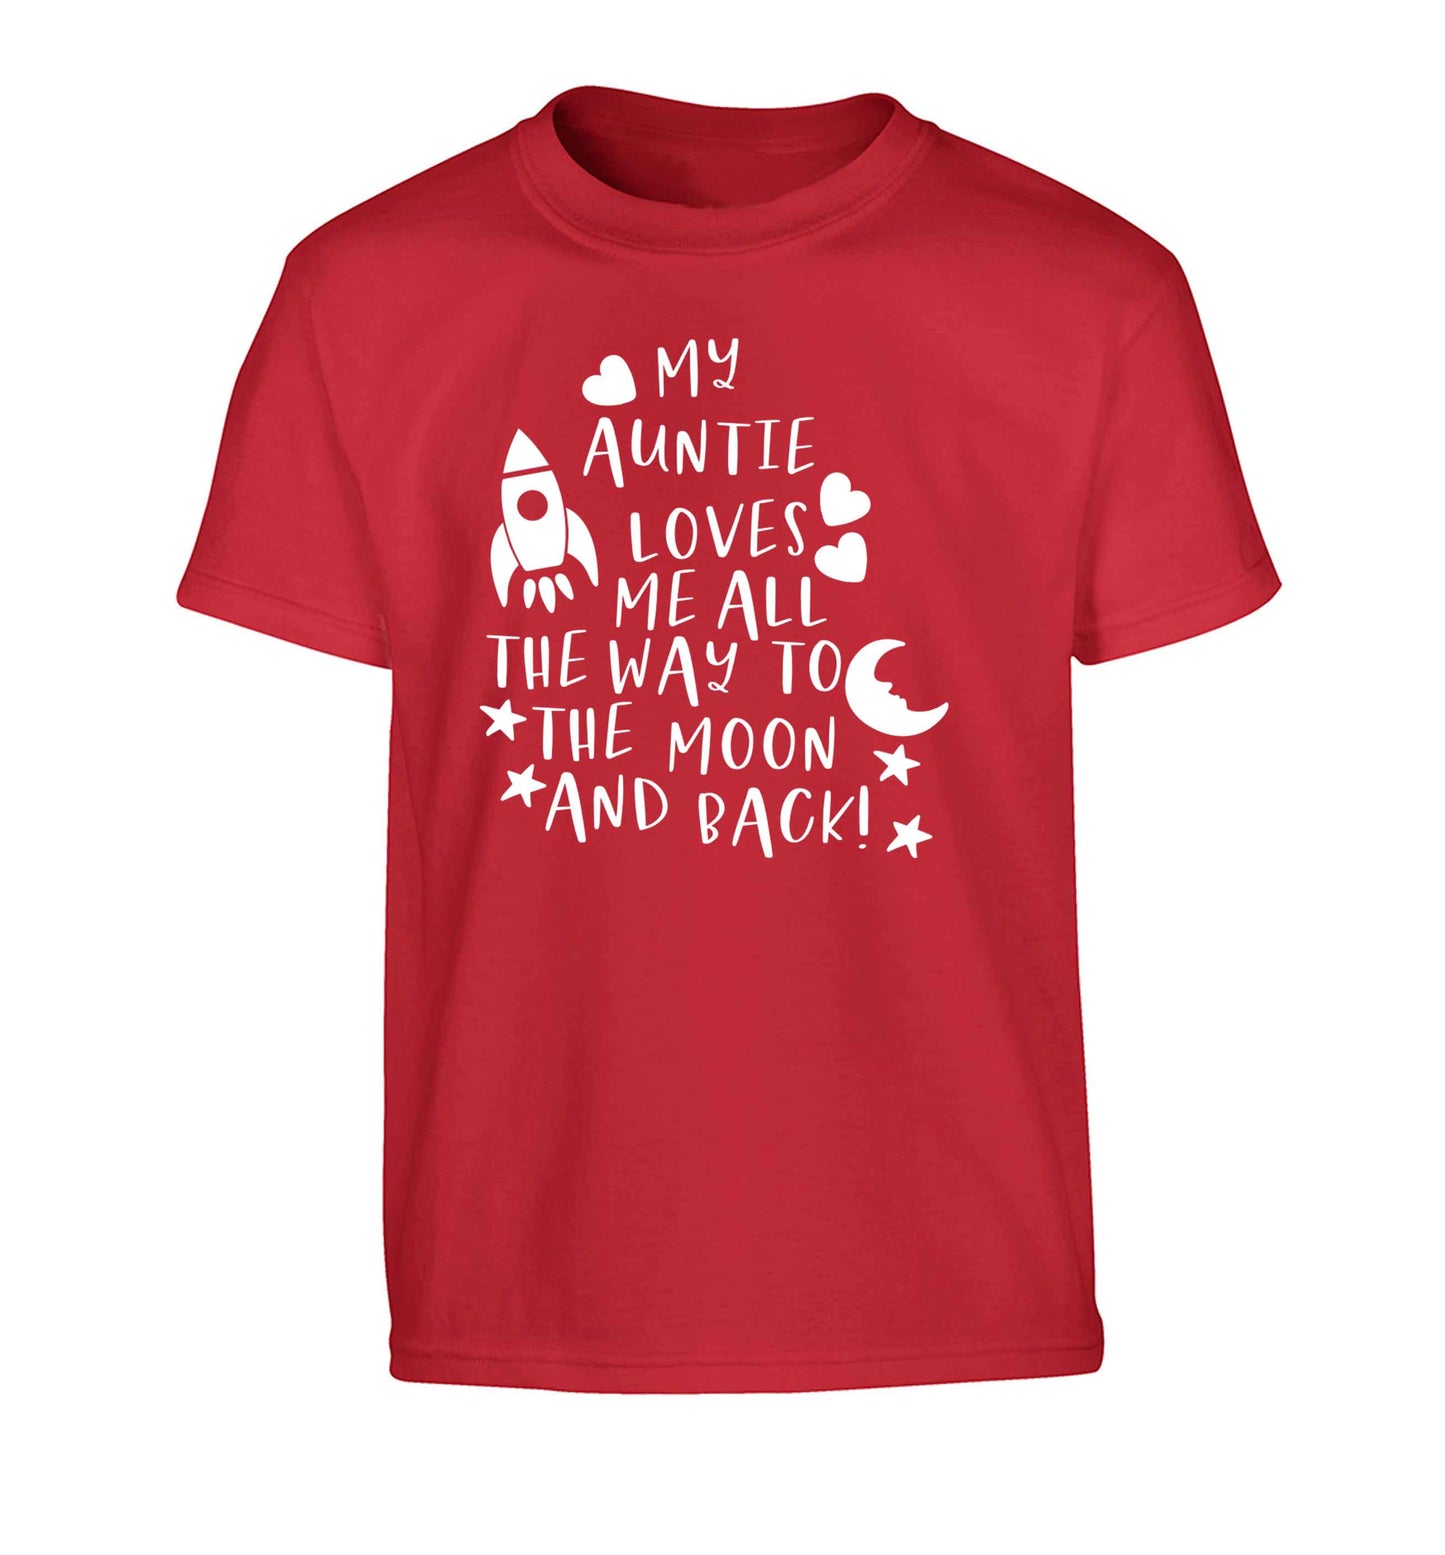 My auntie loves me all the way to the moon and back Children's red Tshirt 12-13 Years